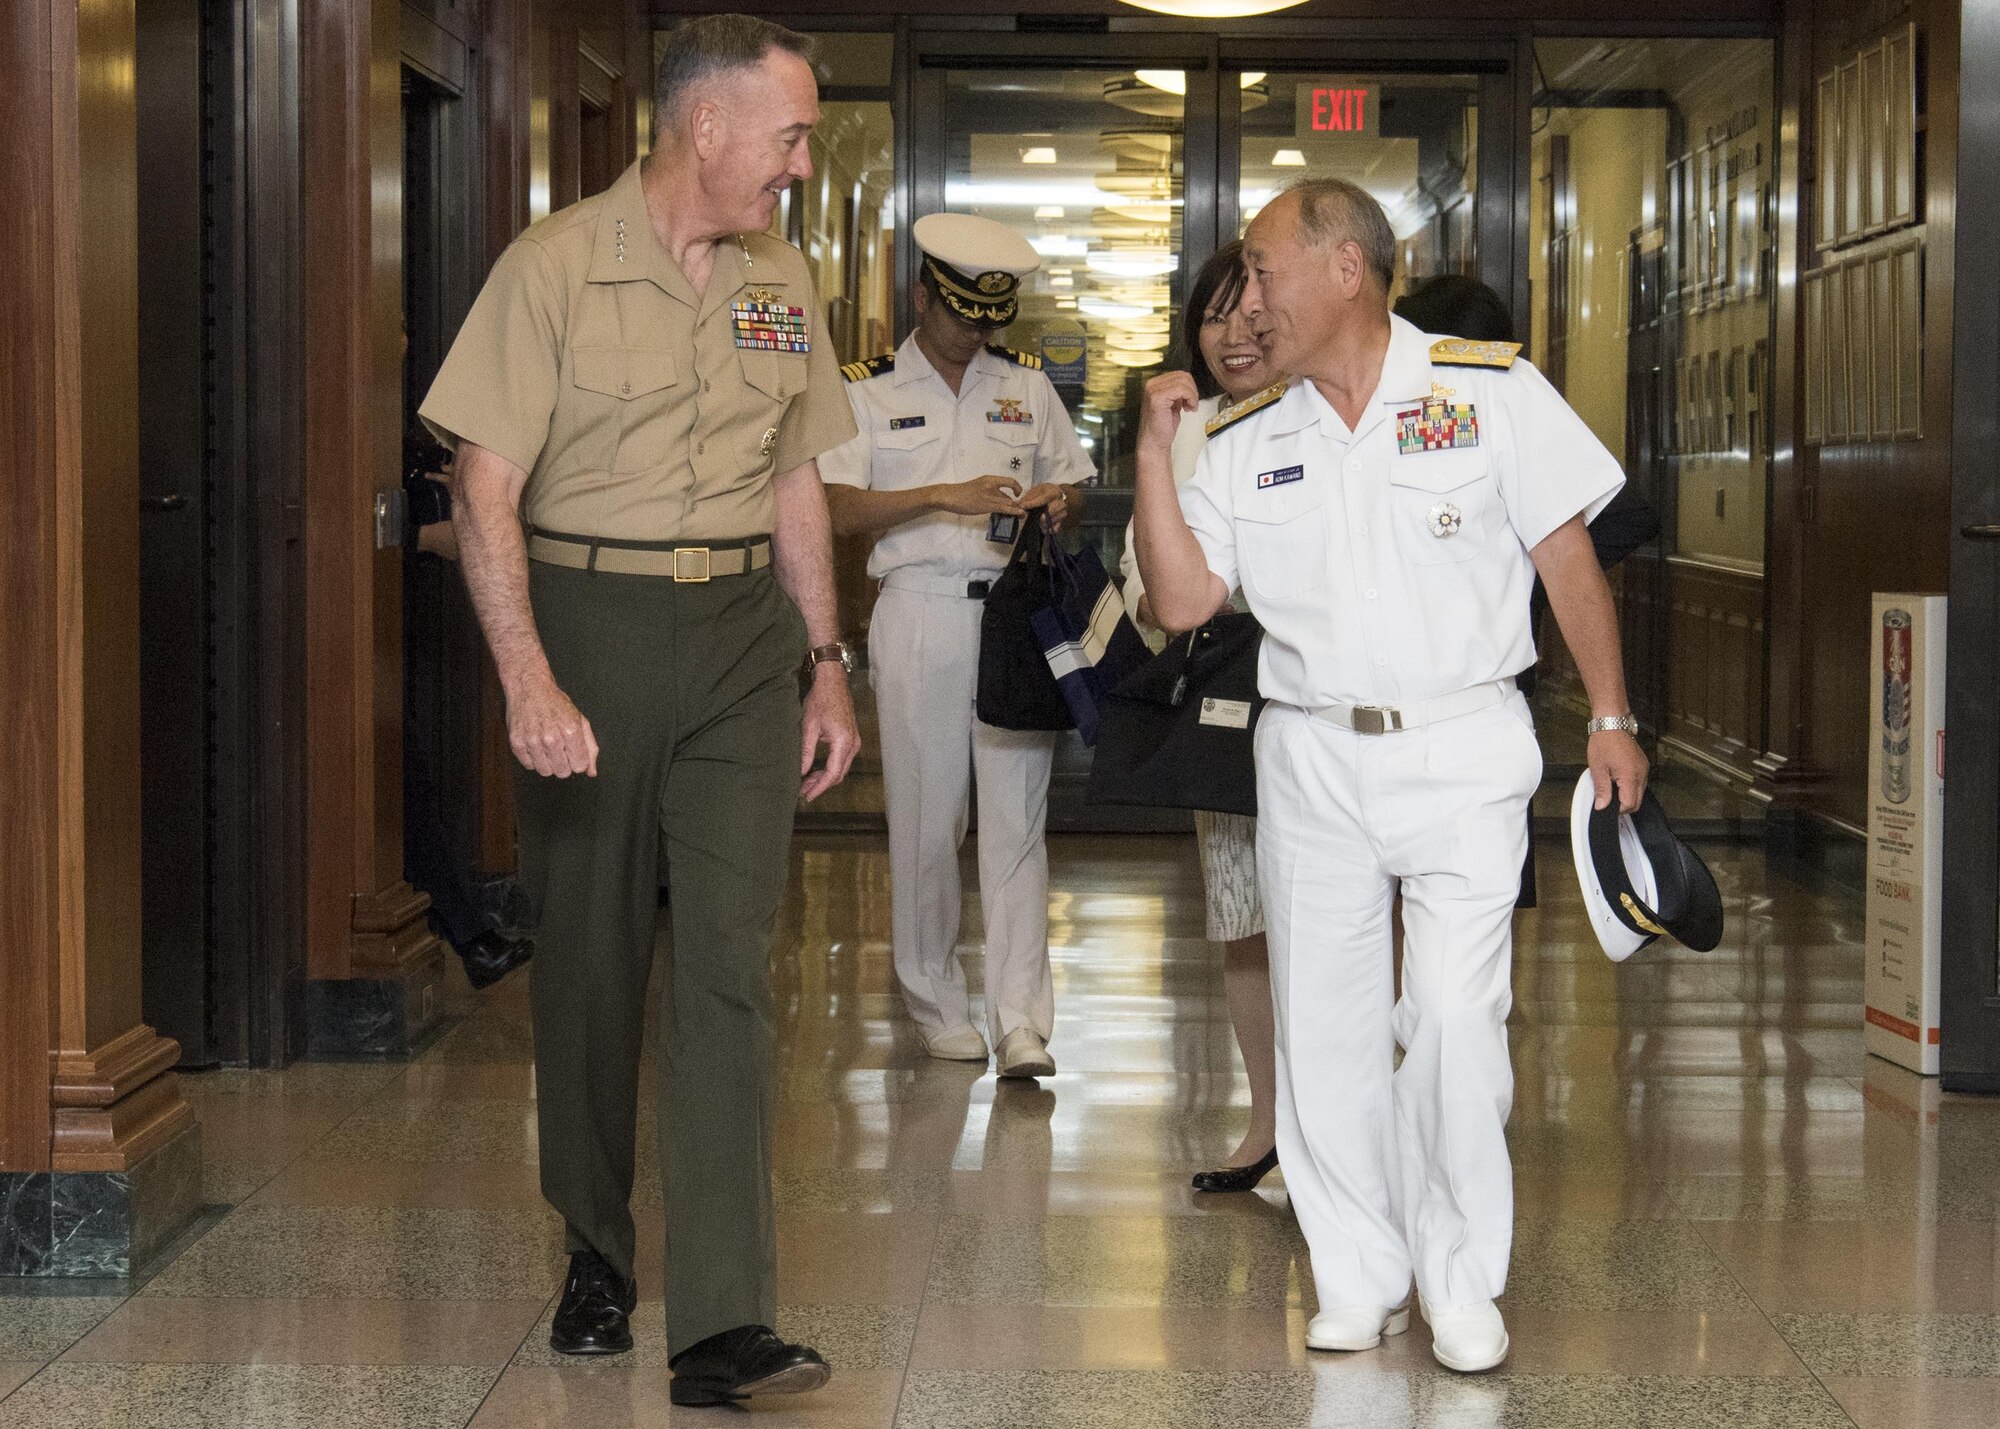 Marine Corps Gen. Joseph F. Dunford Jr., chairman of the Joint Chiefs of Staff, meets with his Japan counterpart Adm. Katsutoshi Kawano, Chief of Staff of the Japan Self-Defense Forces, at the Pentagon, July 27, 2017. 